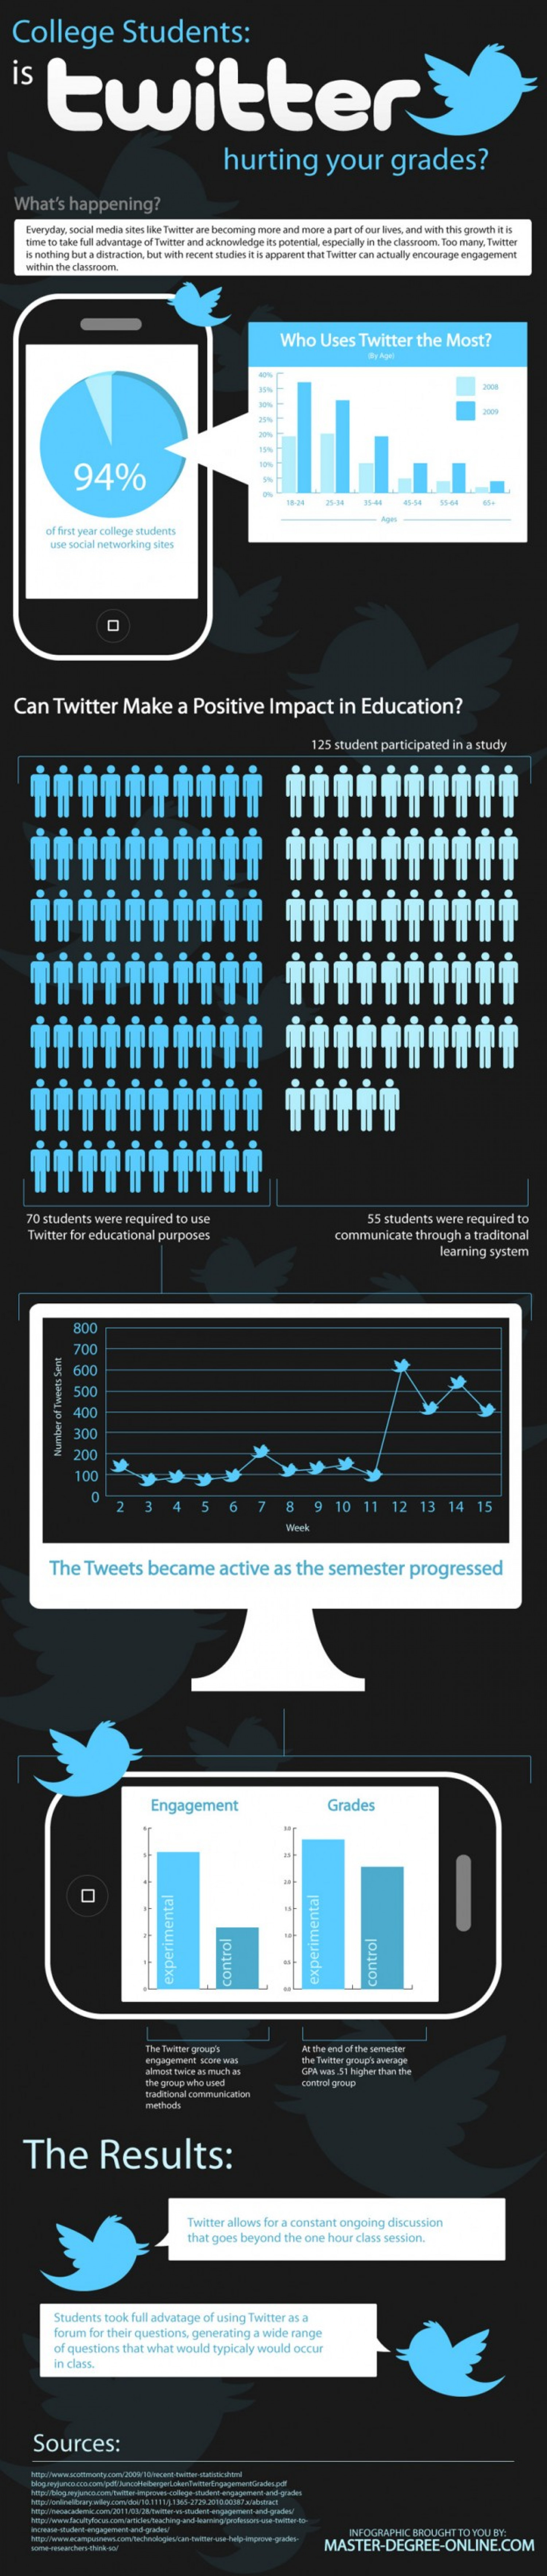 College Students - Is Twitter Hurting Your Grades? Infographic